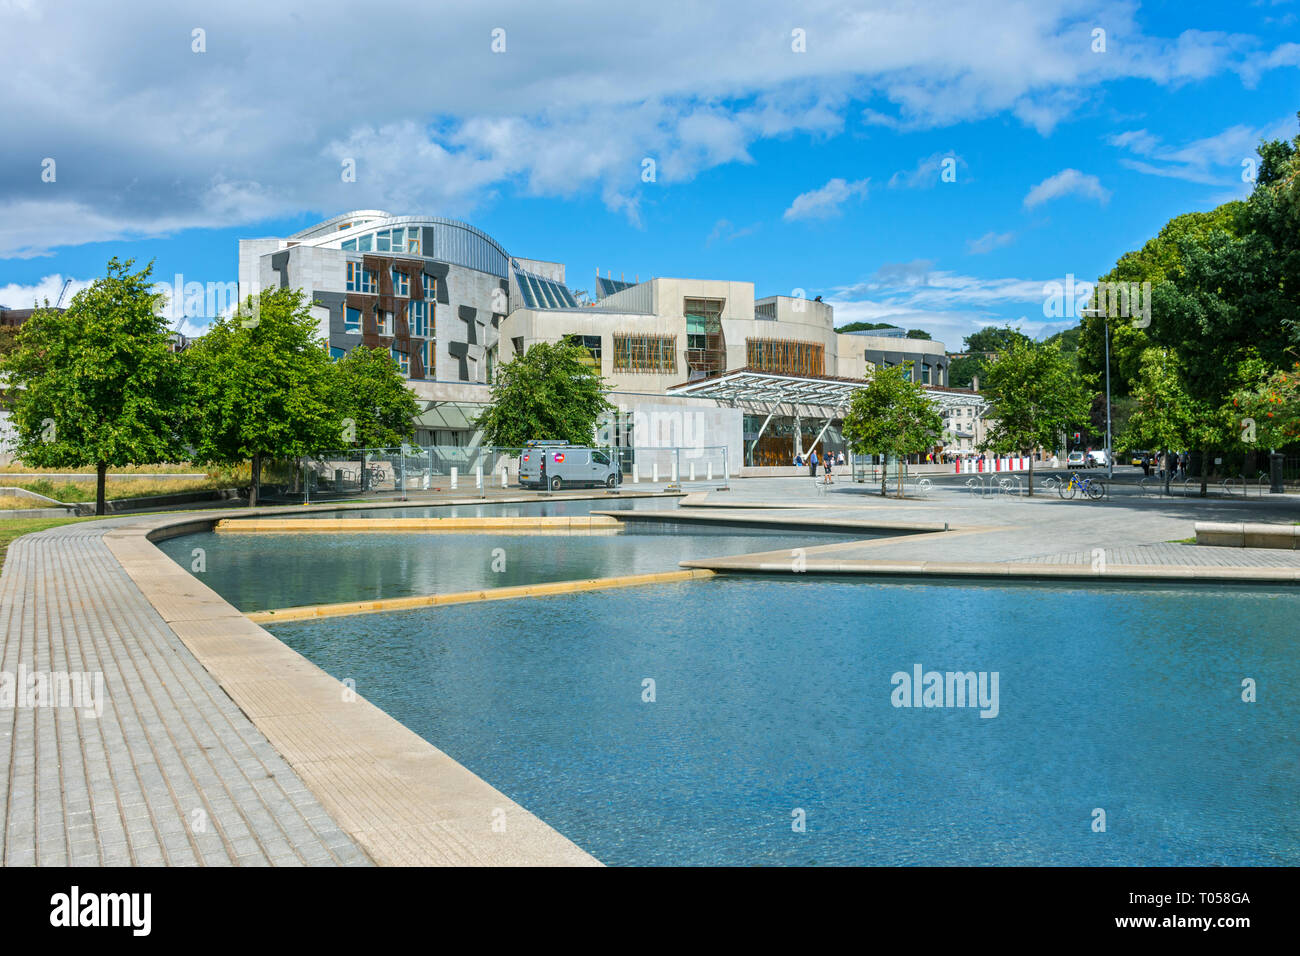 The Scottish Parliament Building (by Enric Miralles 2004), from the park area, Holyrood, Edinburgh, Scotland, UK Stock Photo